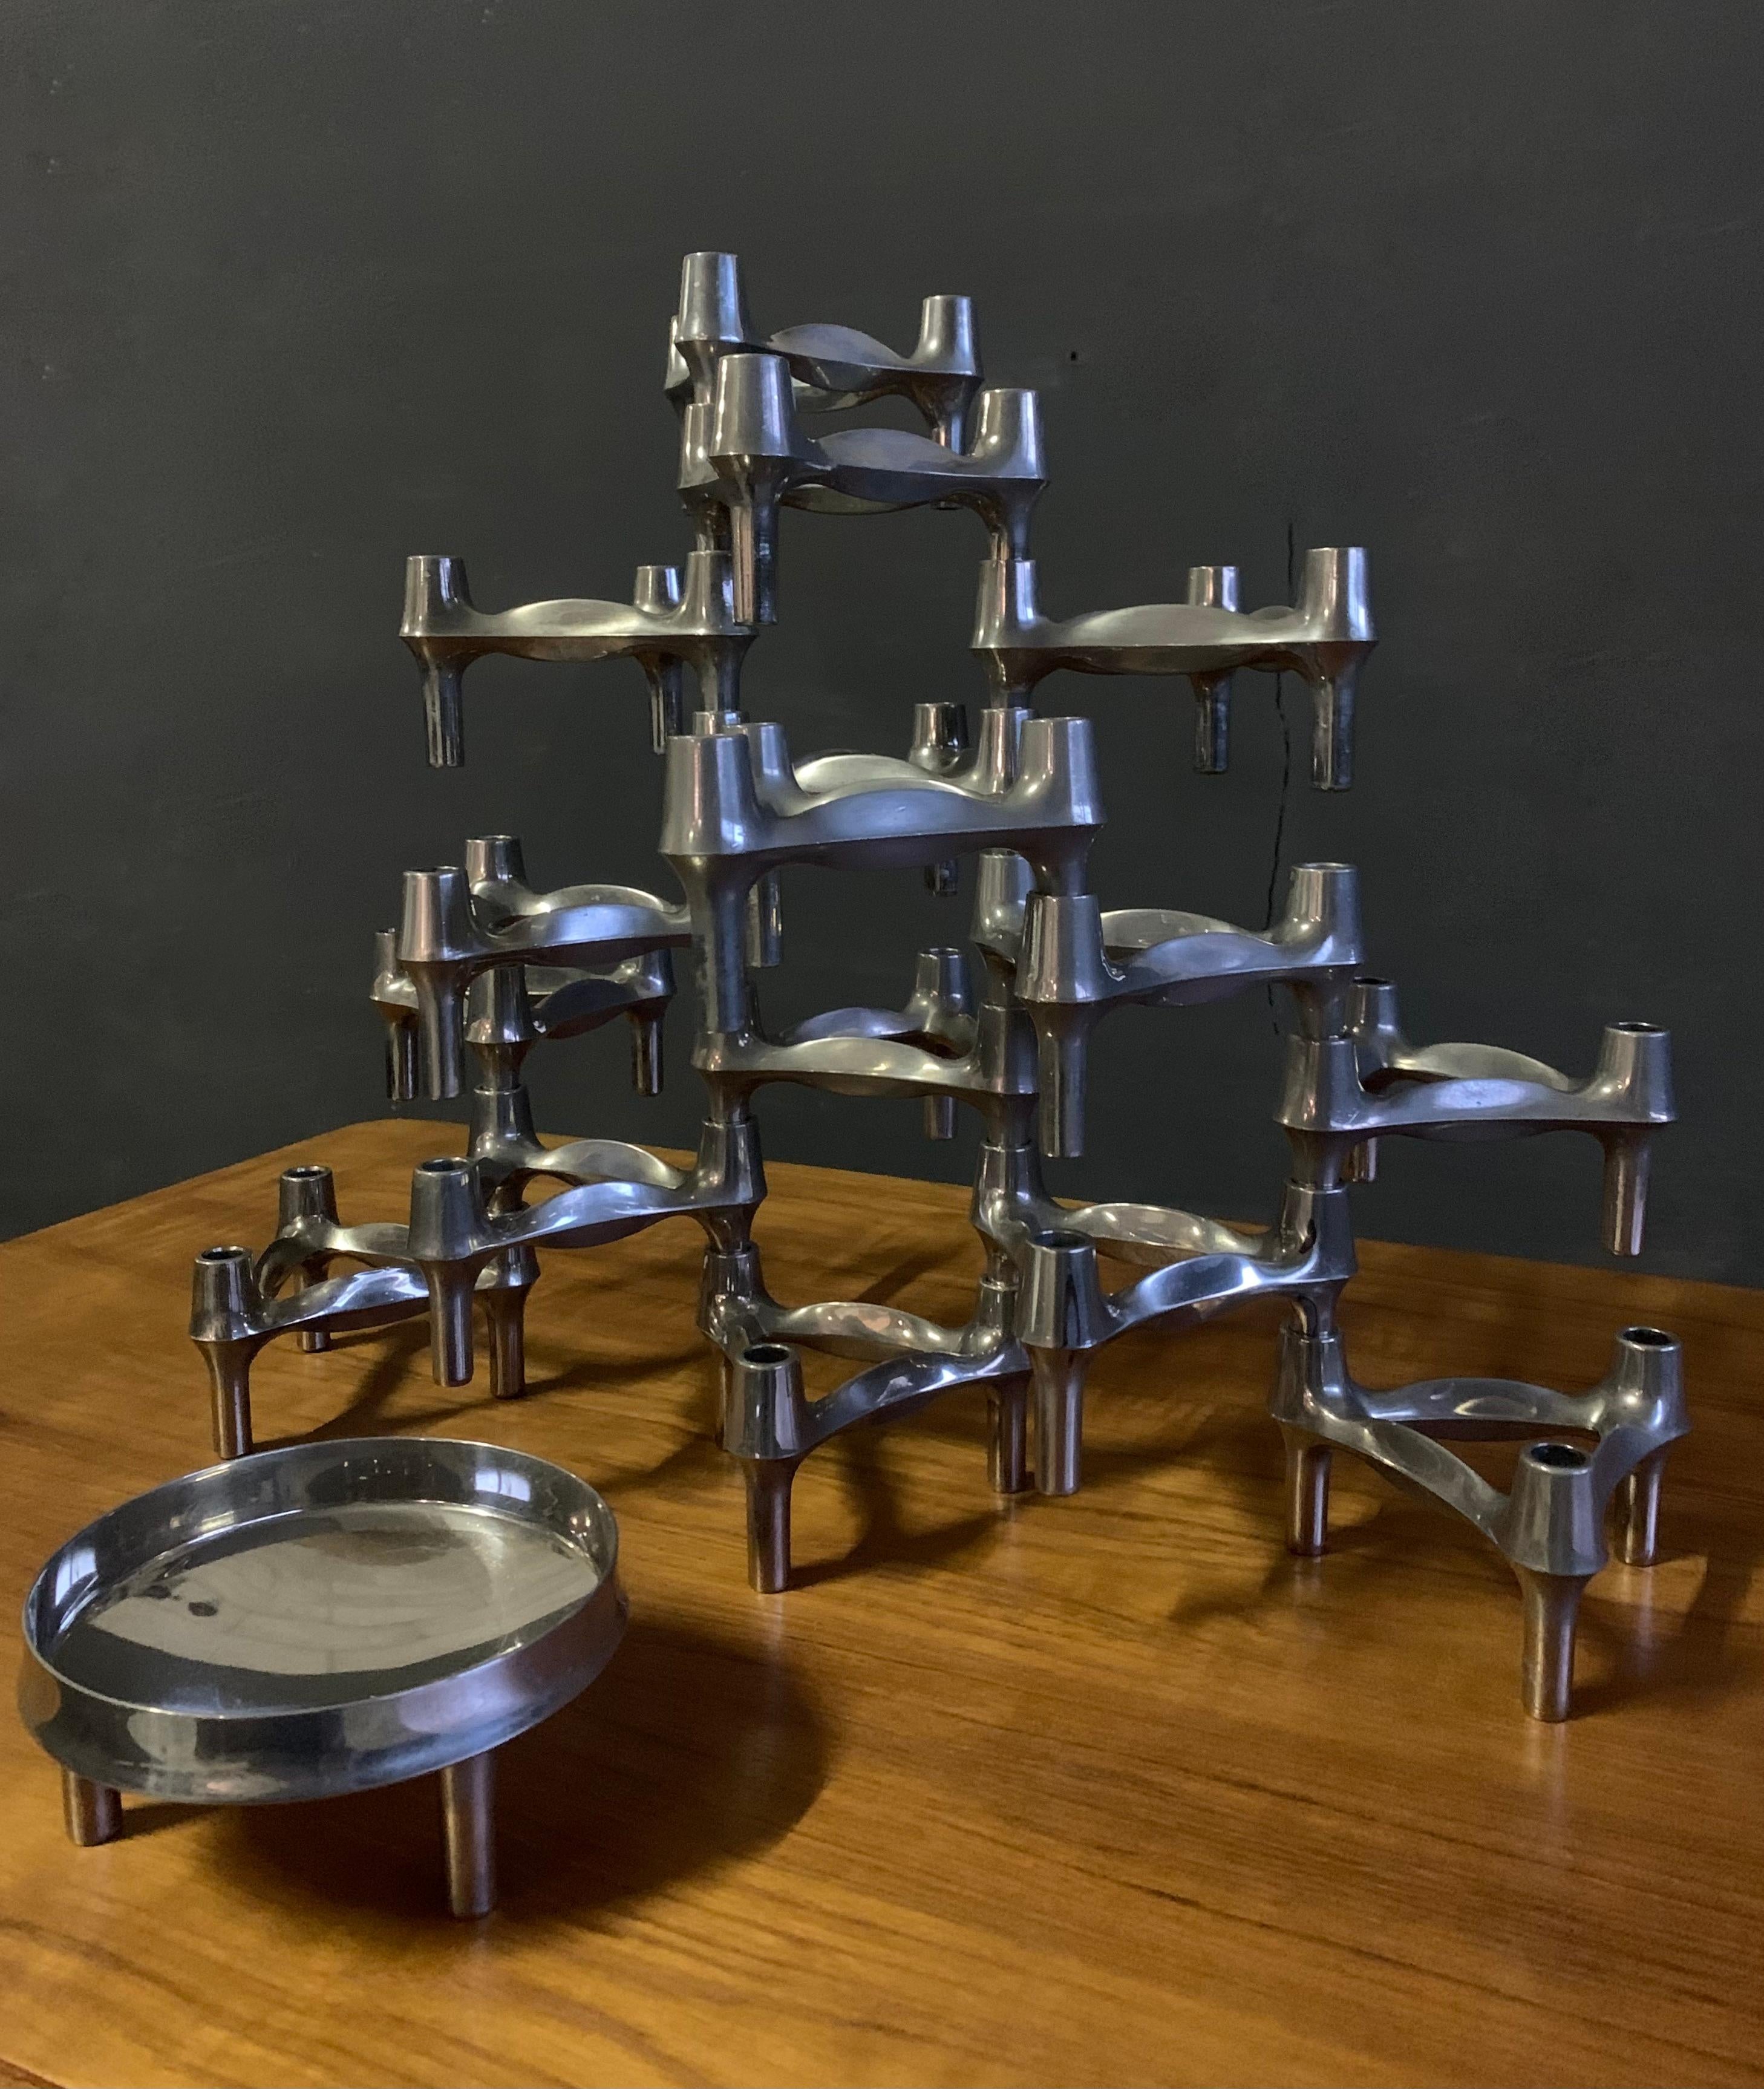 Architectural stackable candleholder elements sculpture by BMF Nagel, designed in the 1960s by Ceasar Stoffi and Fritz Nagel.
Manufacturered by BMF (Bayerischen Metallwaren Fabrik), Germany in 1970.

The sculpture contains of 17 stackable 'BMF